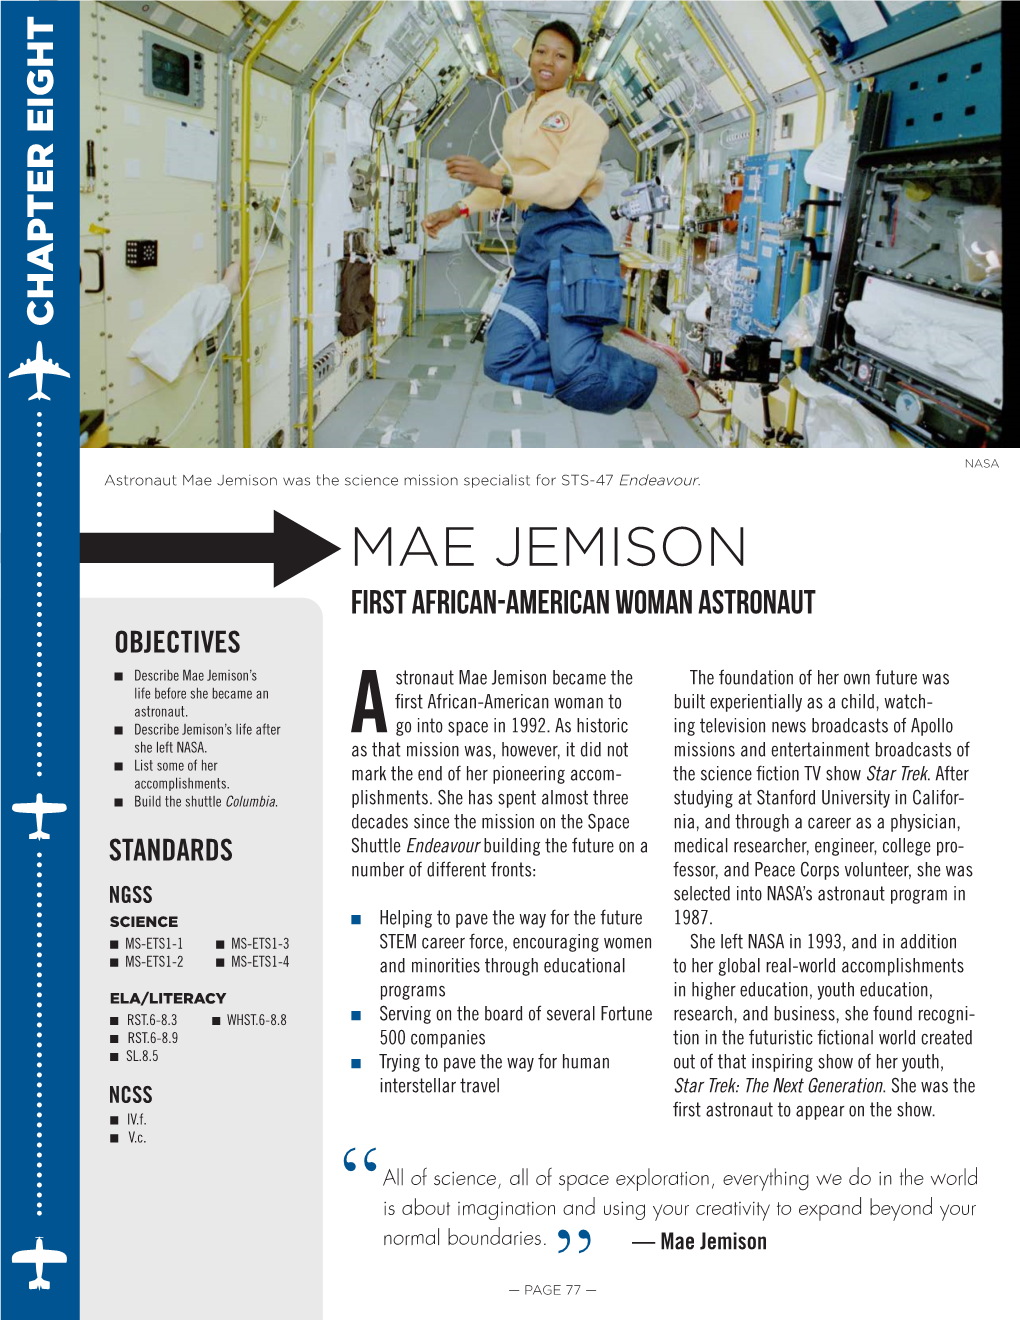 Mae Jemison Was the Science Mission Specialist for STS-47 Endeavour